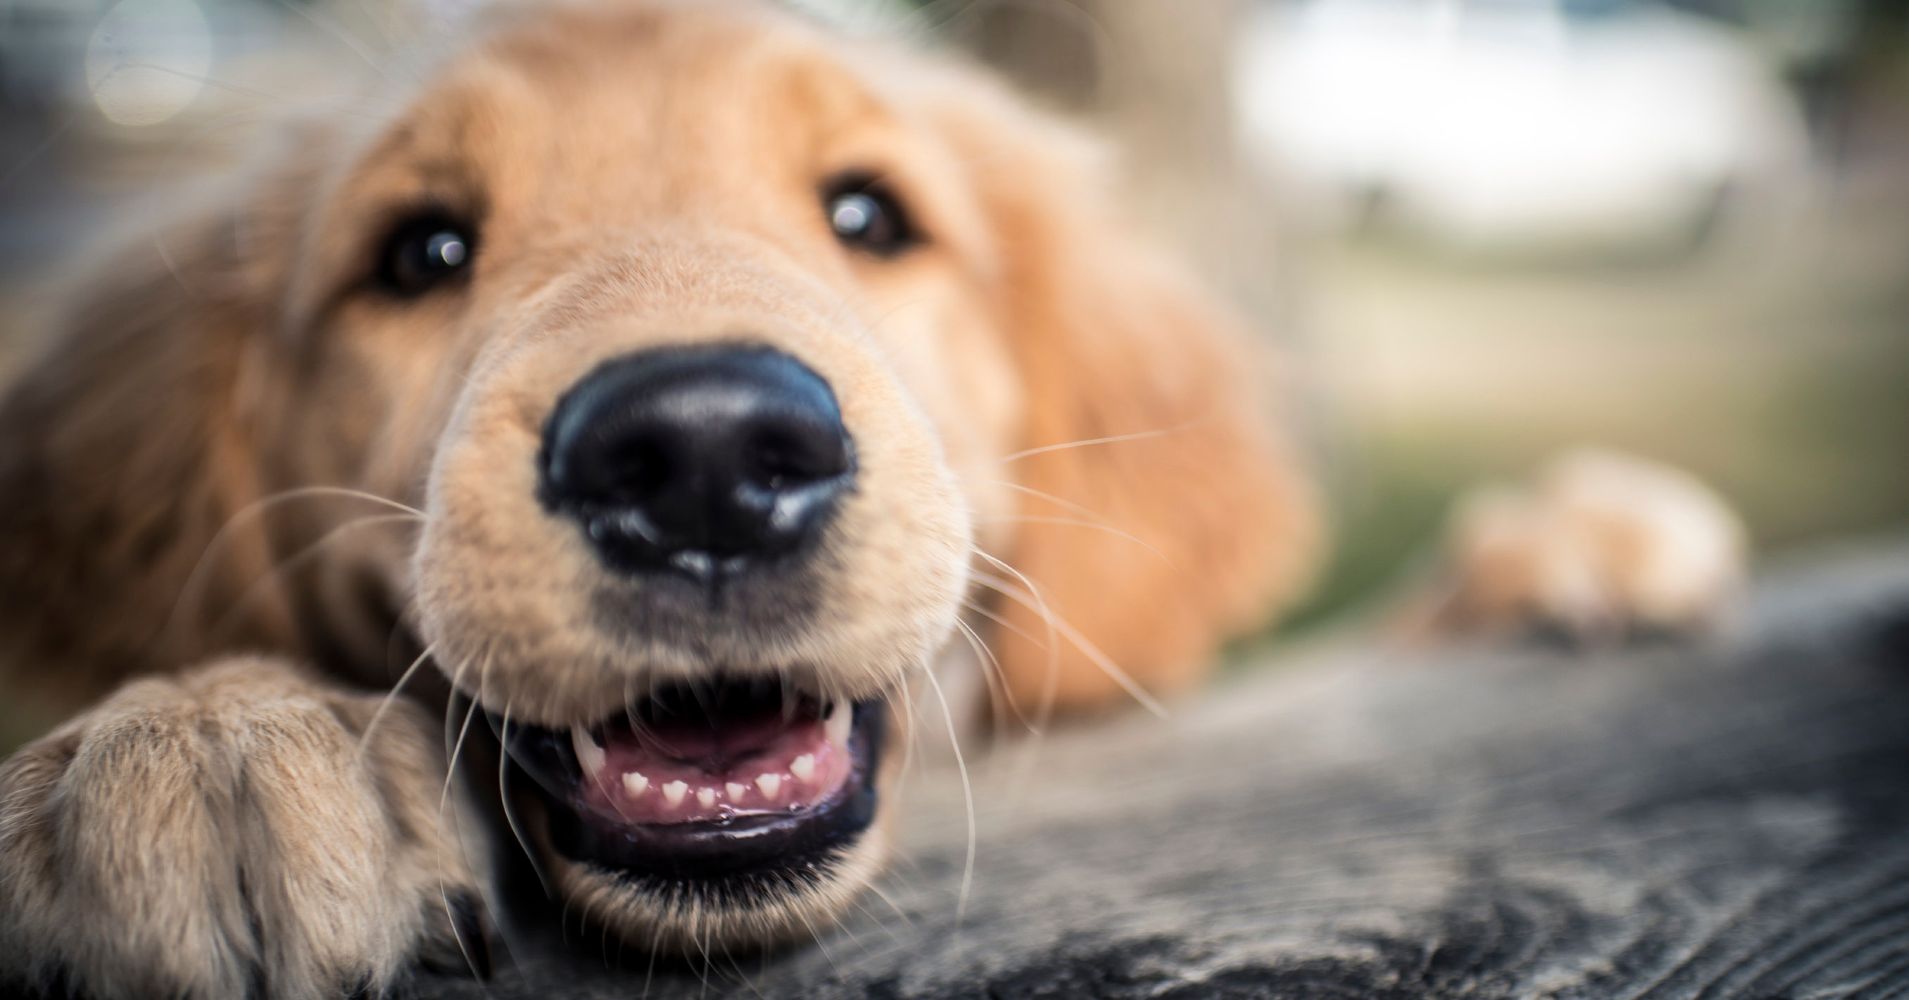 4 Things You Can Do To Make Your Pet Happier And Healthier